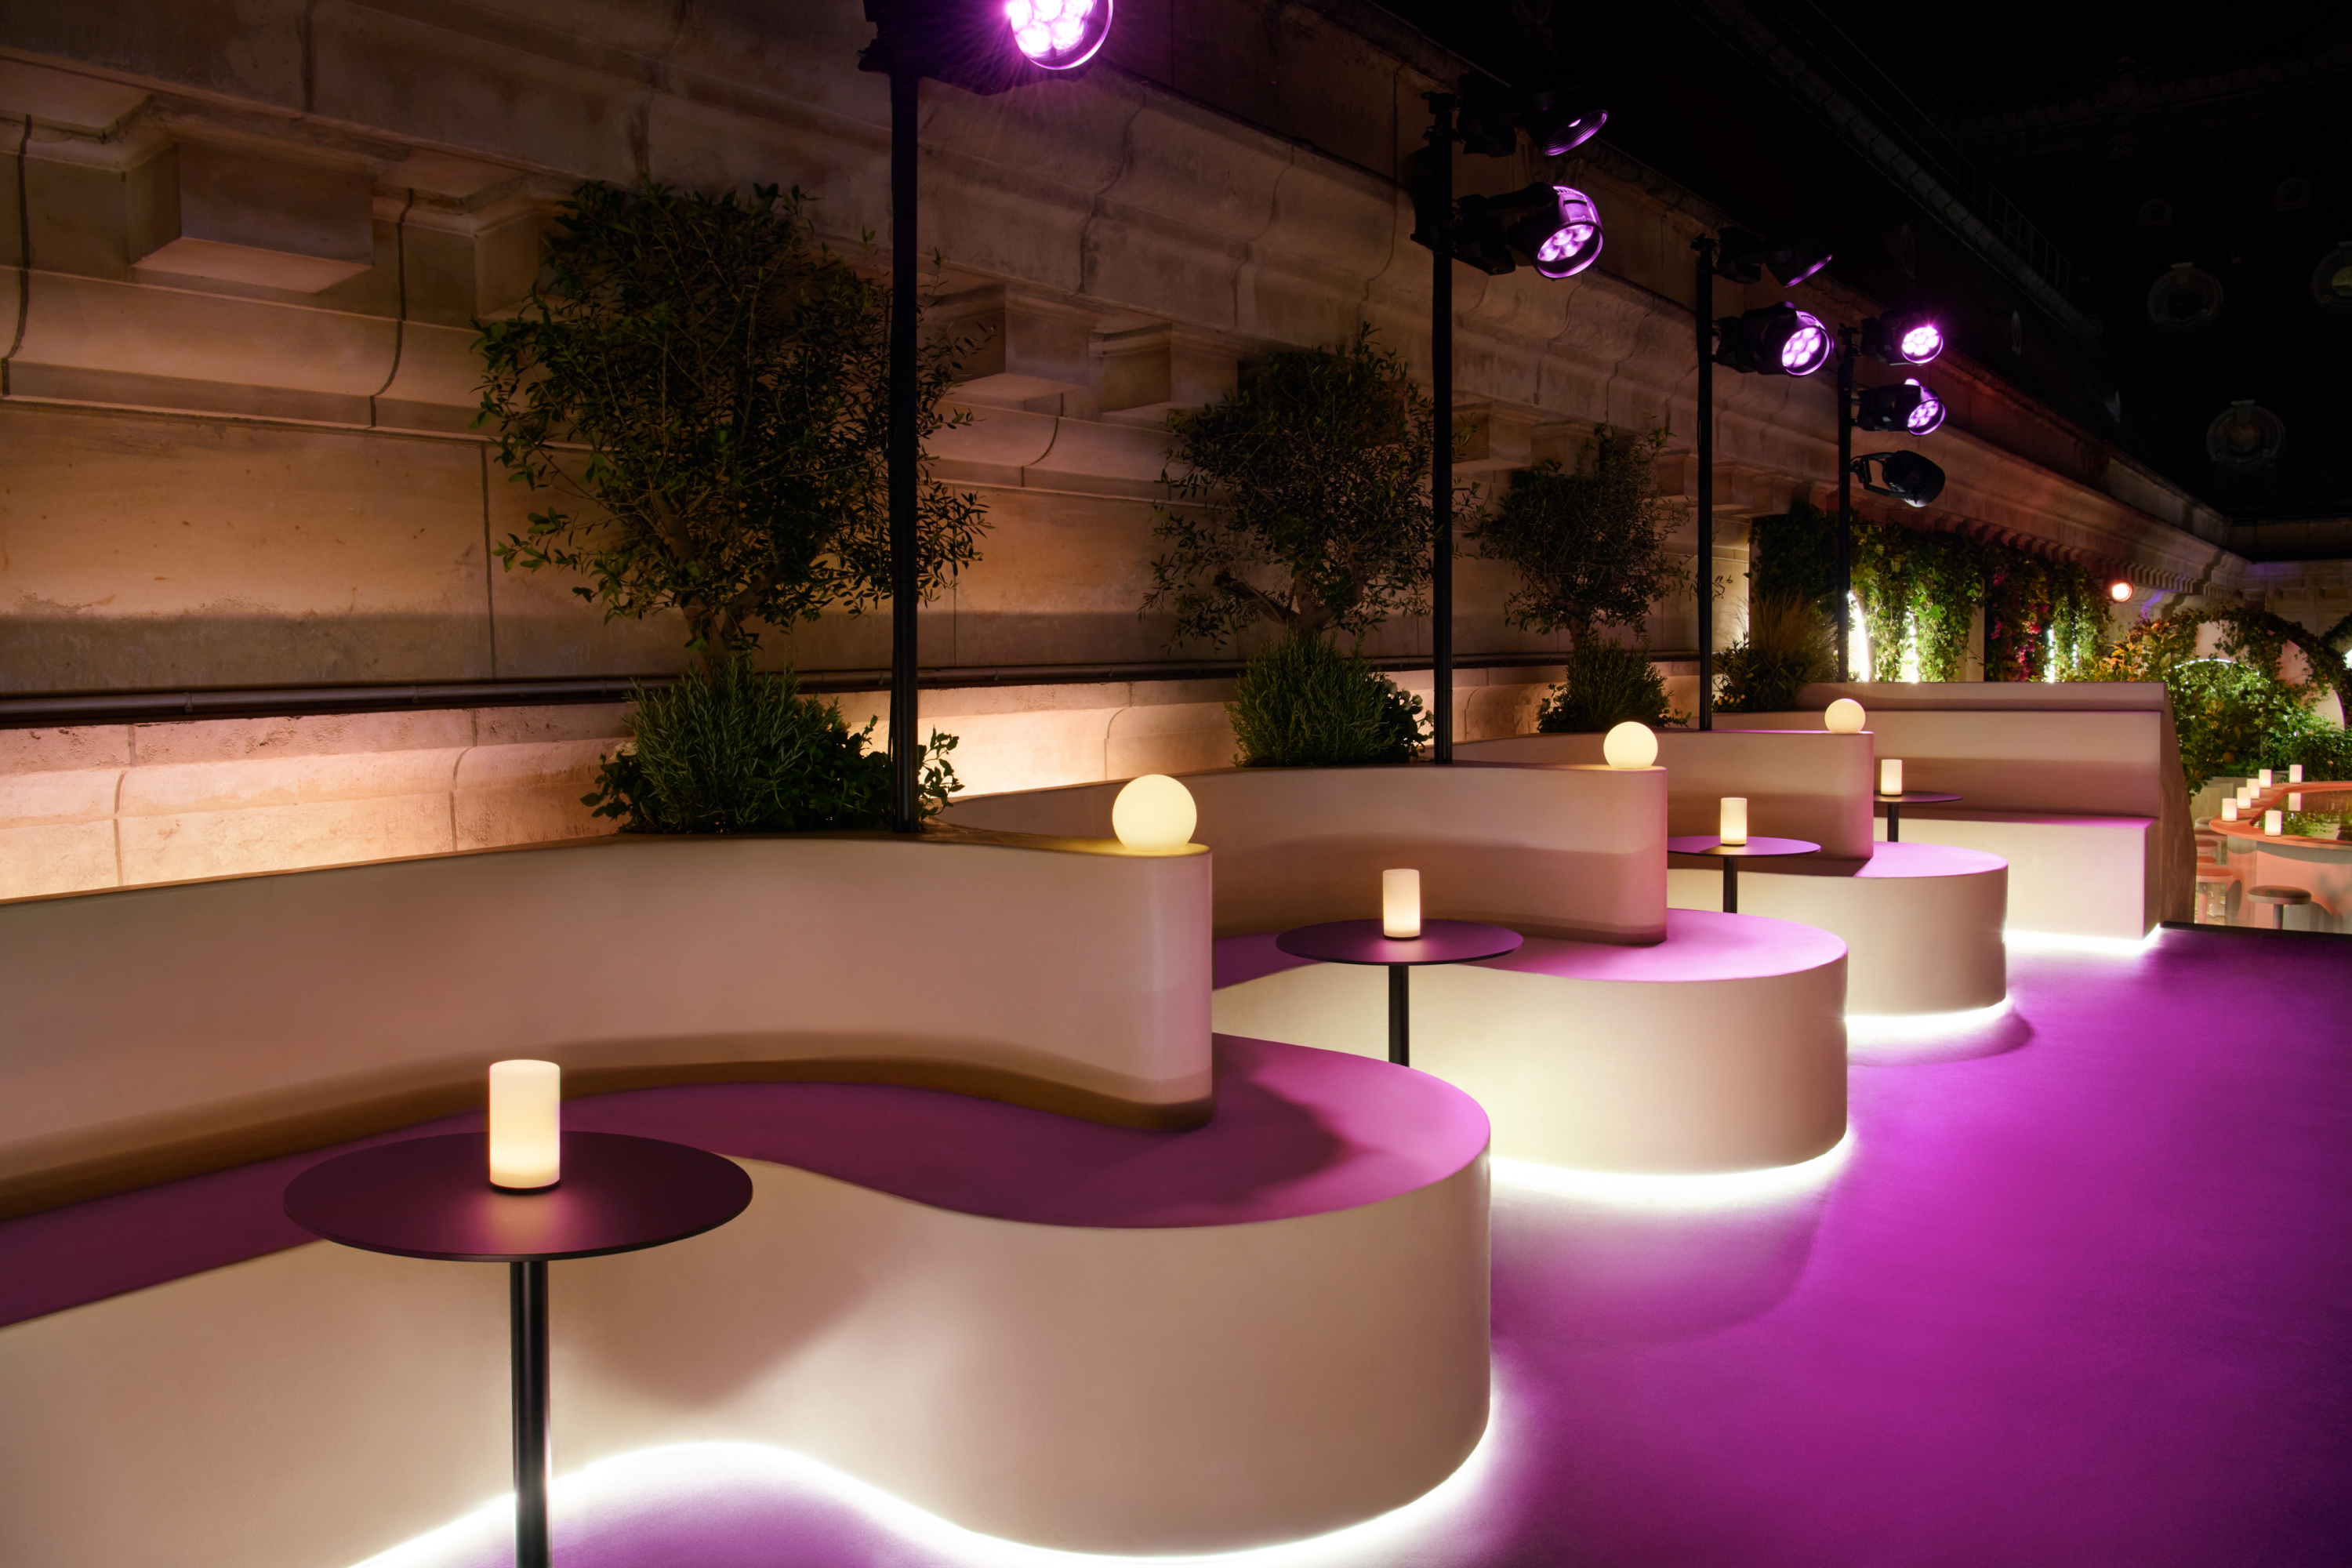 A close up of some of the seating on the terrace - a wavy shaped pink banquette